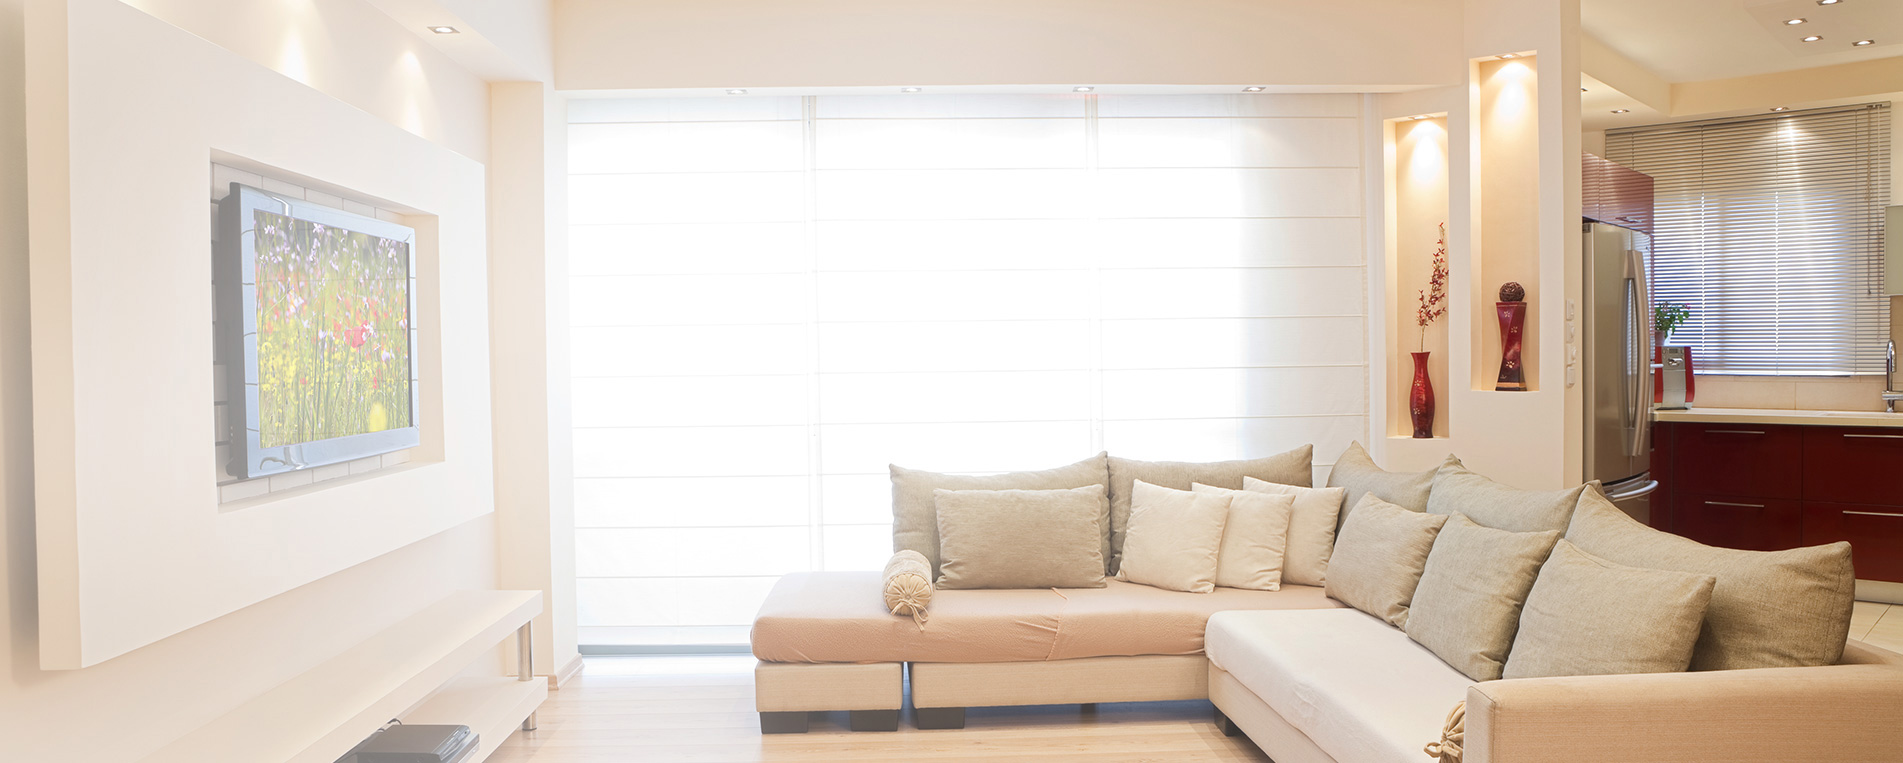 Blinds and Shades That Help with Insulation